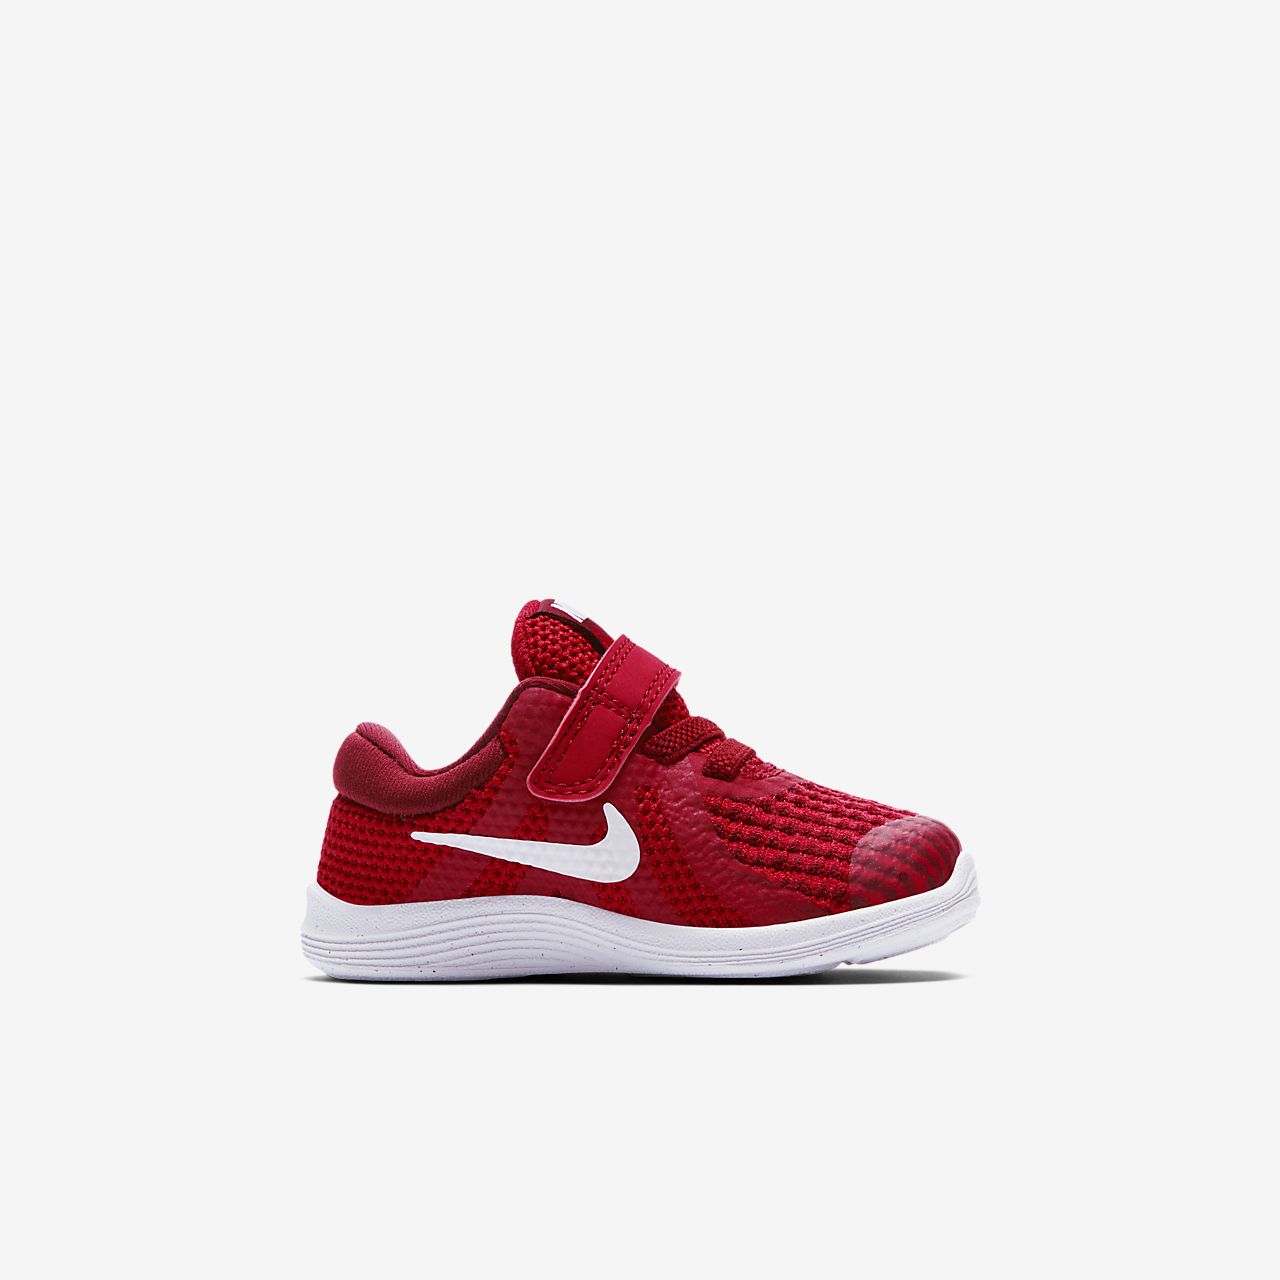 red nike shoes for toddlers